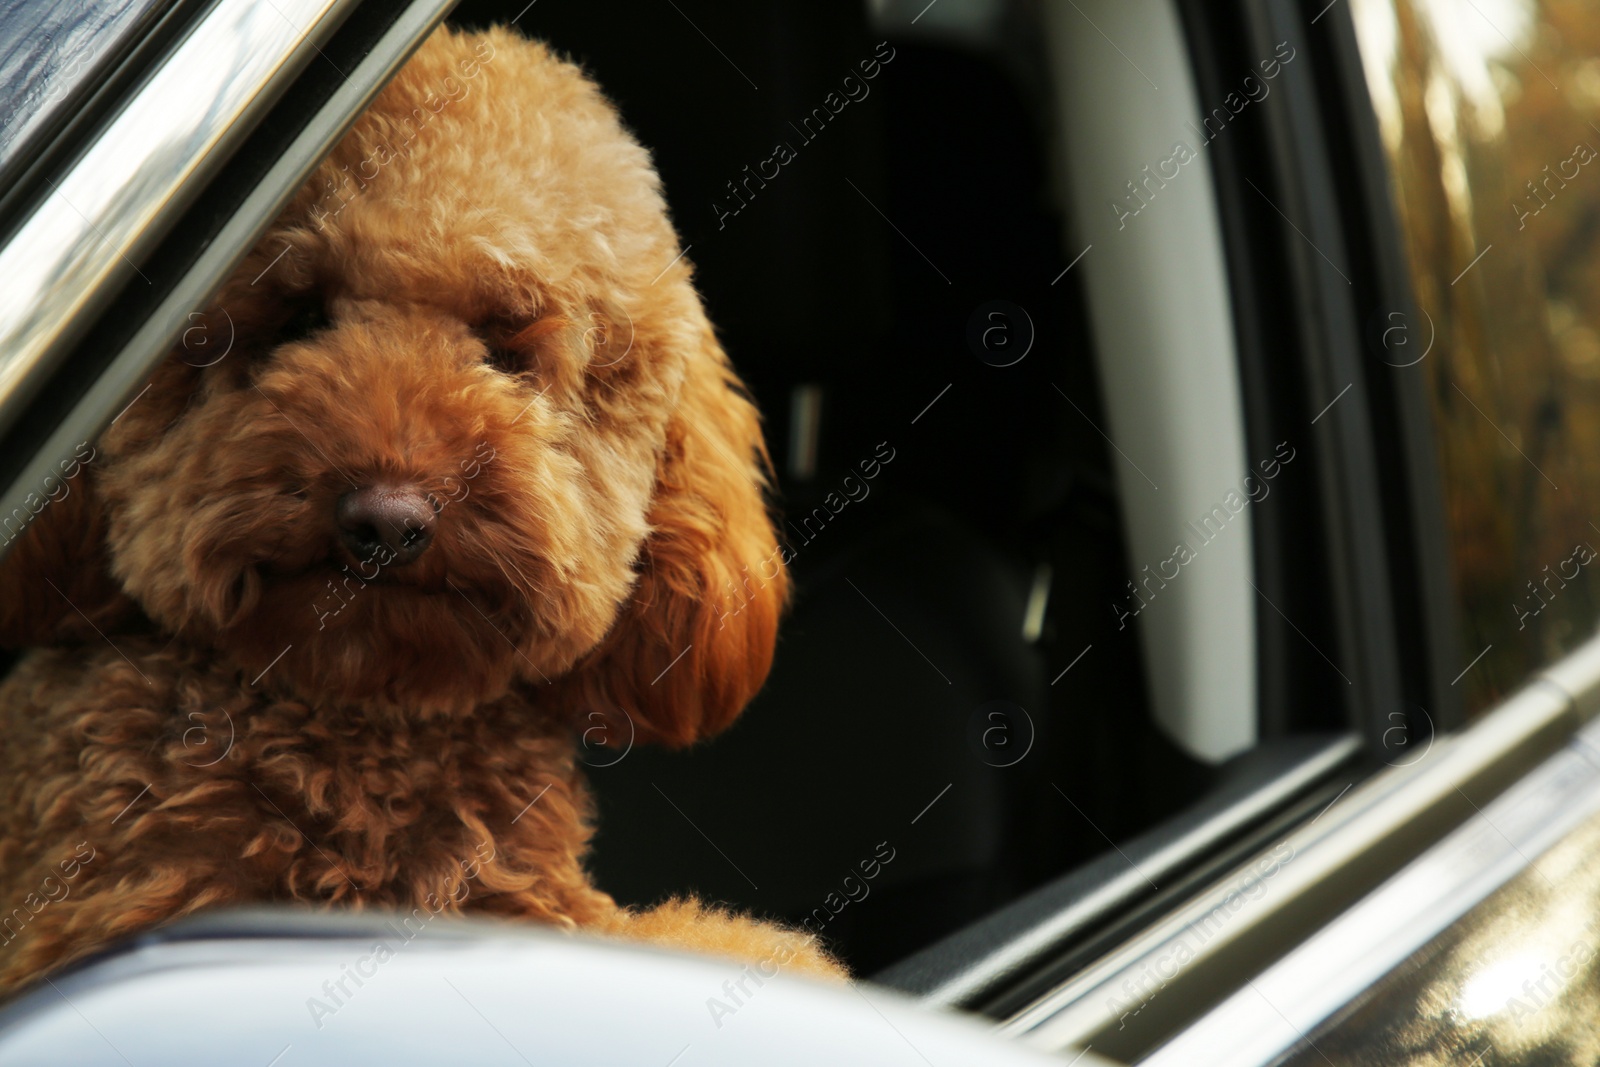 Photo of Cute dog inside black car, view from outside